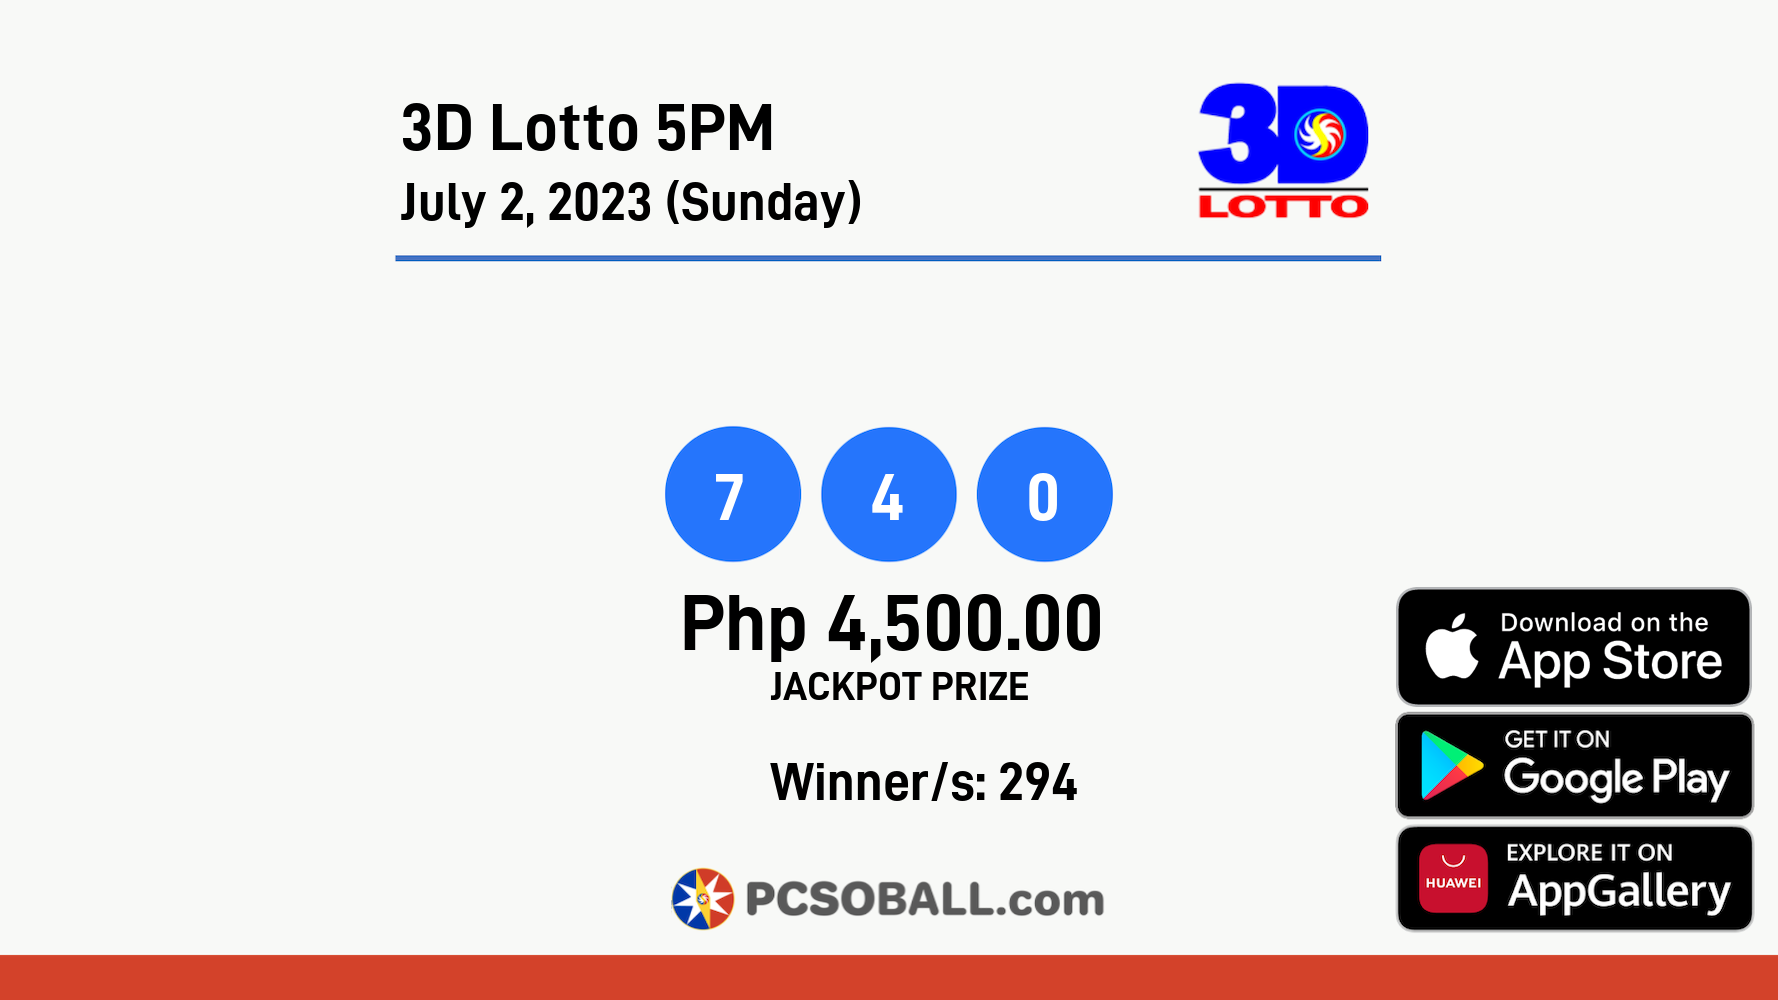 3D Lotto 5PM July 2, 2023 (Sunday) Result